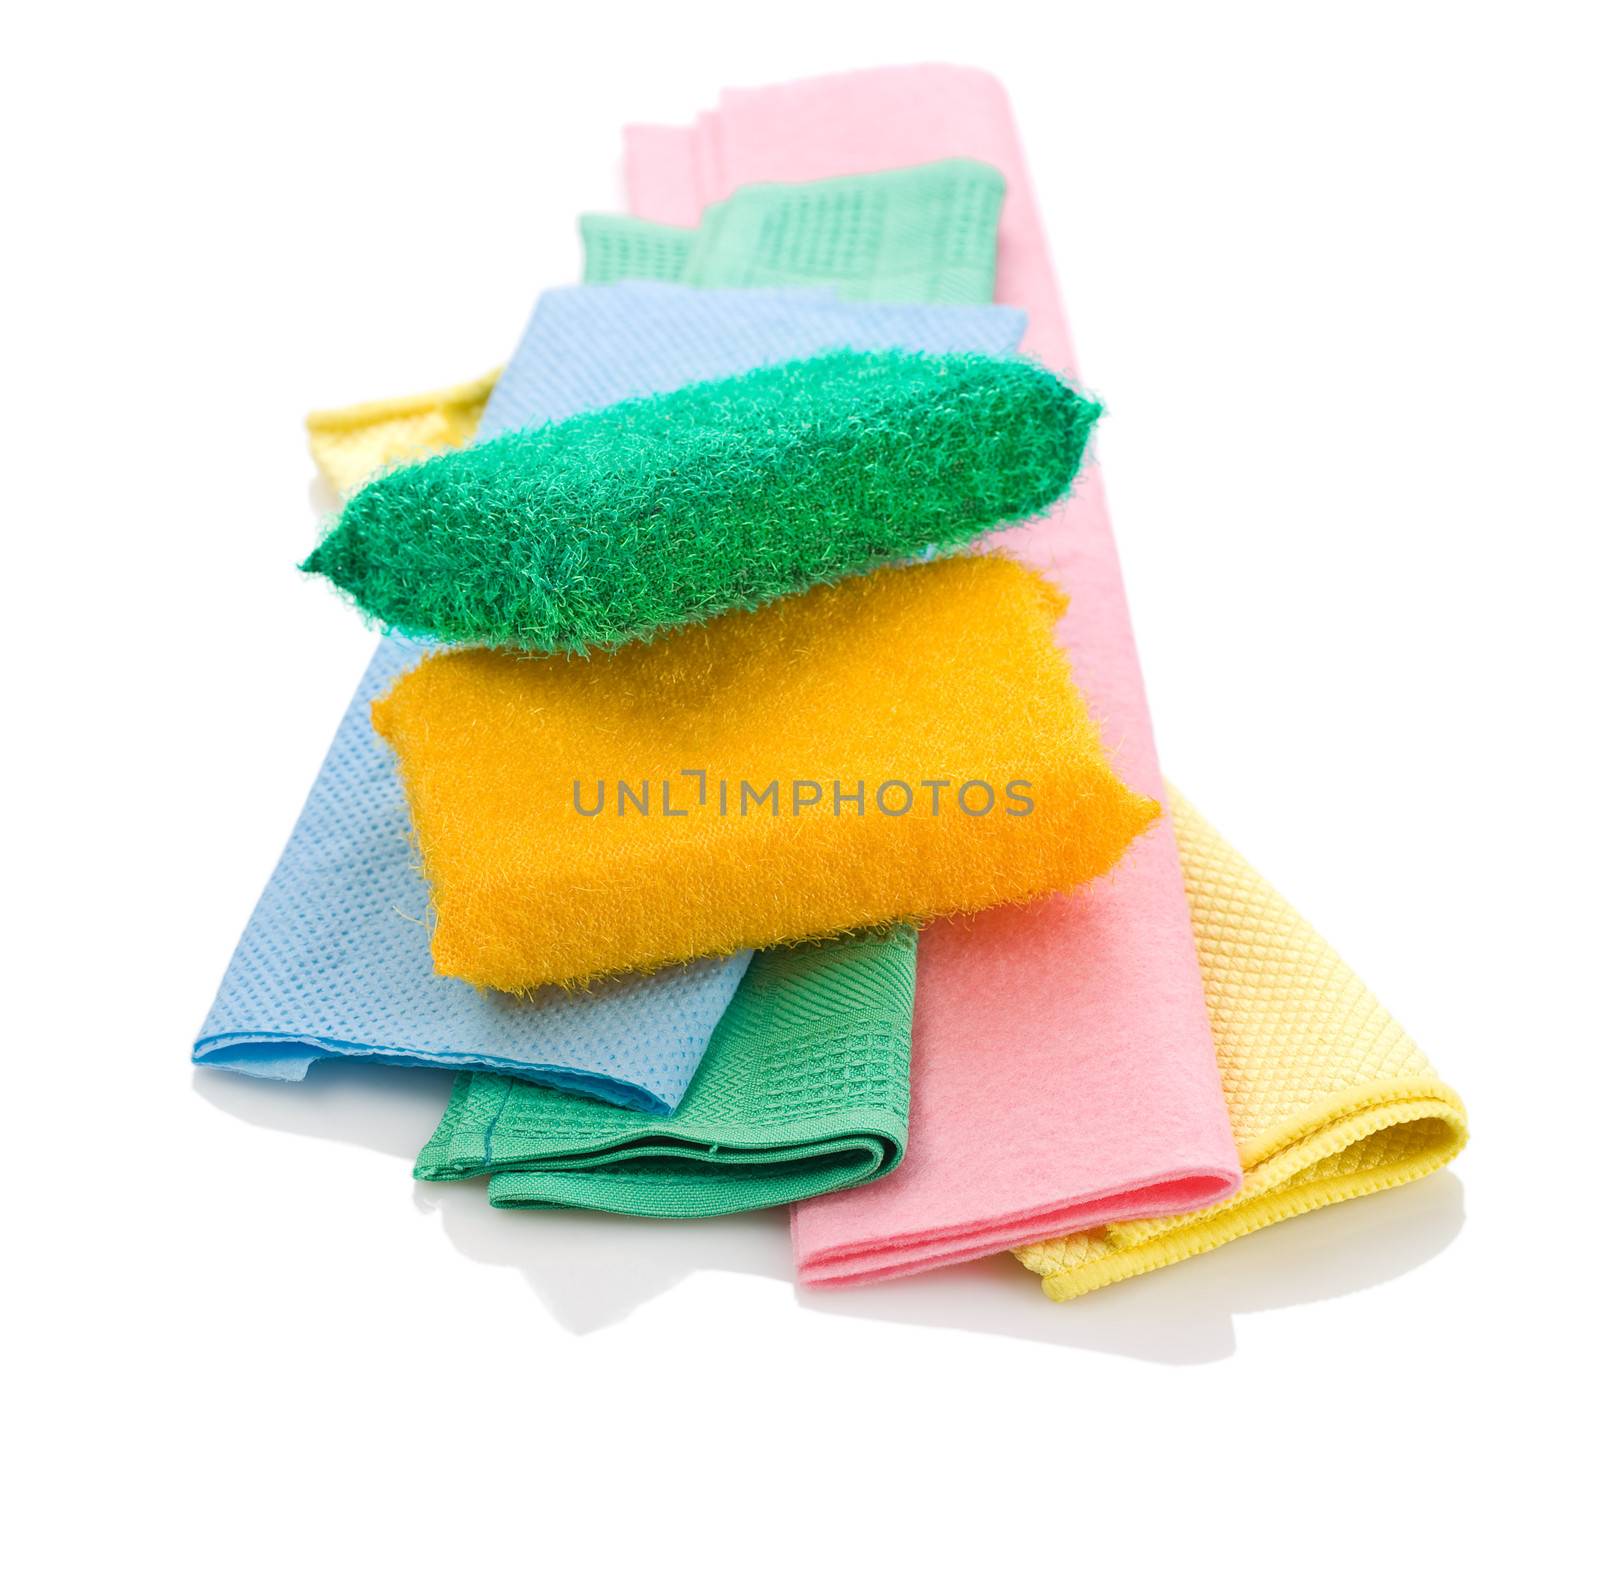 two sponges on rags